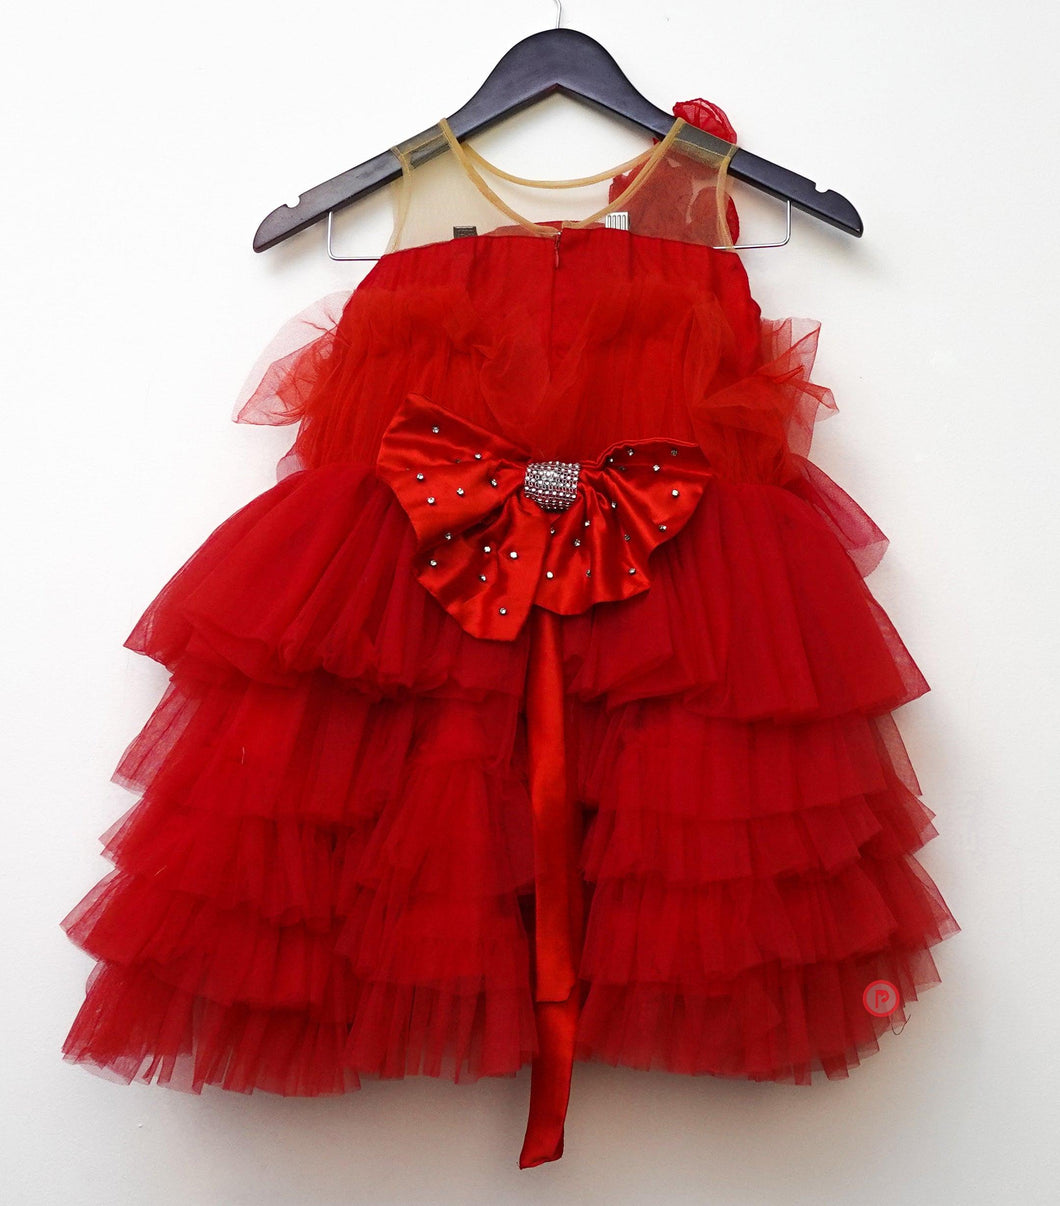 Red Ruffle dress with bow tie